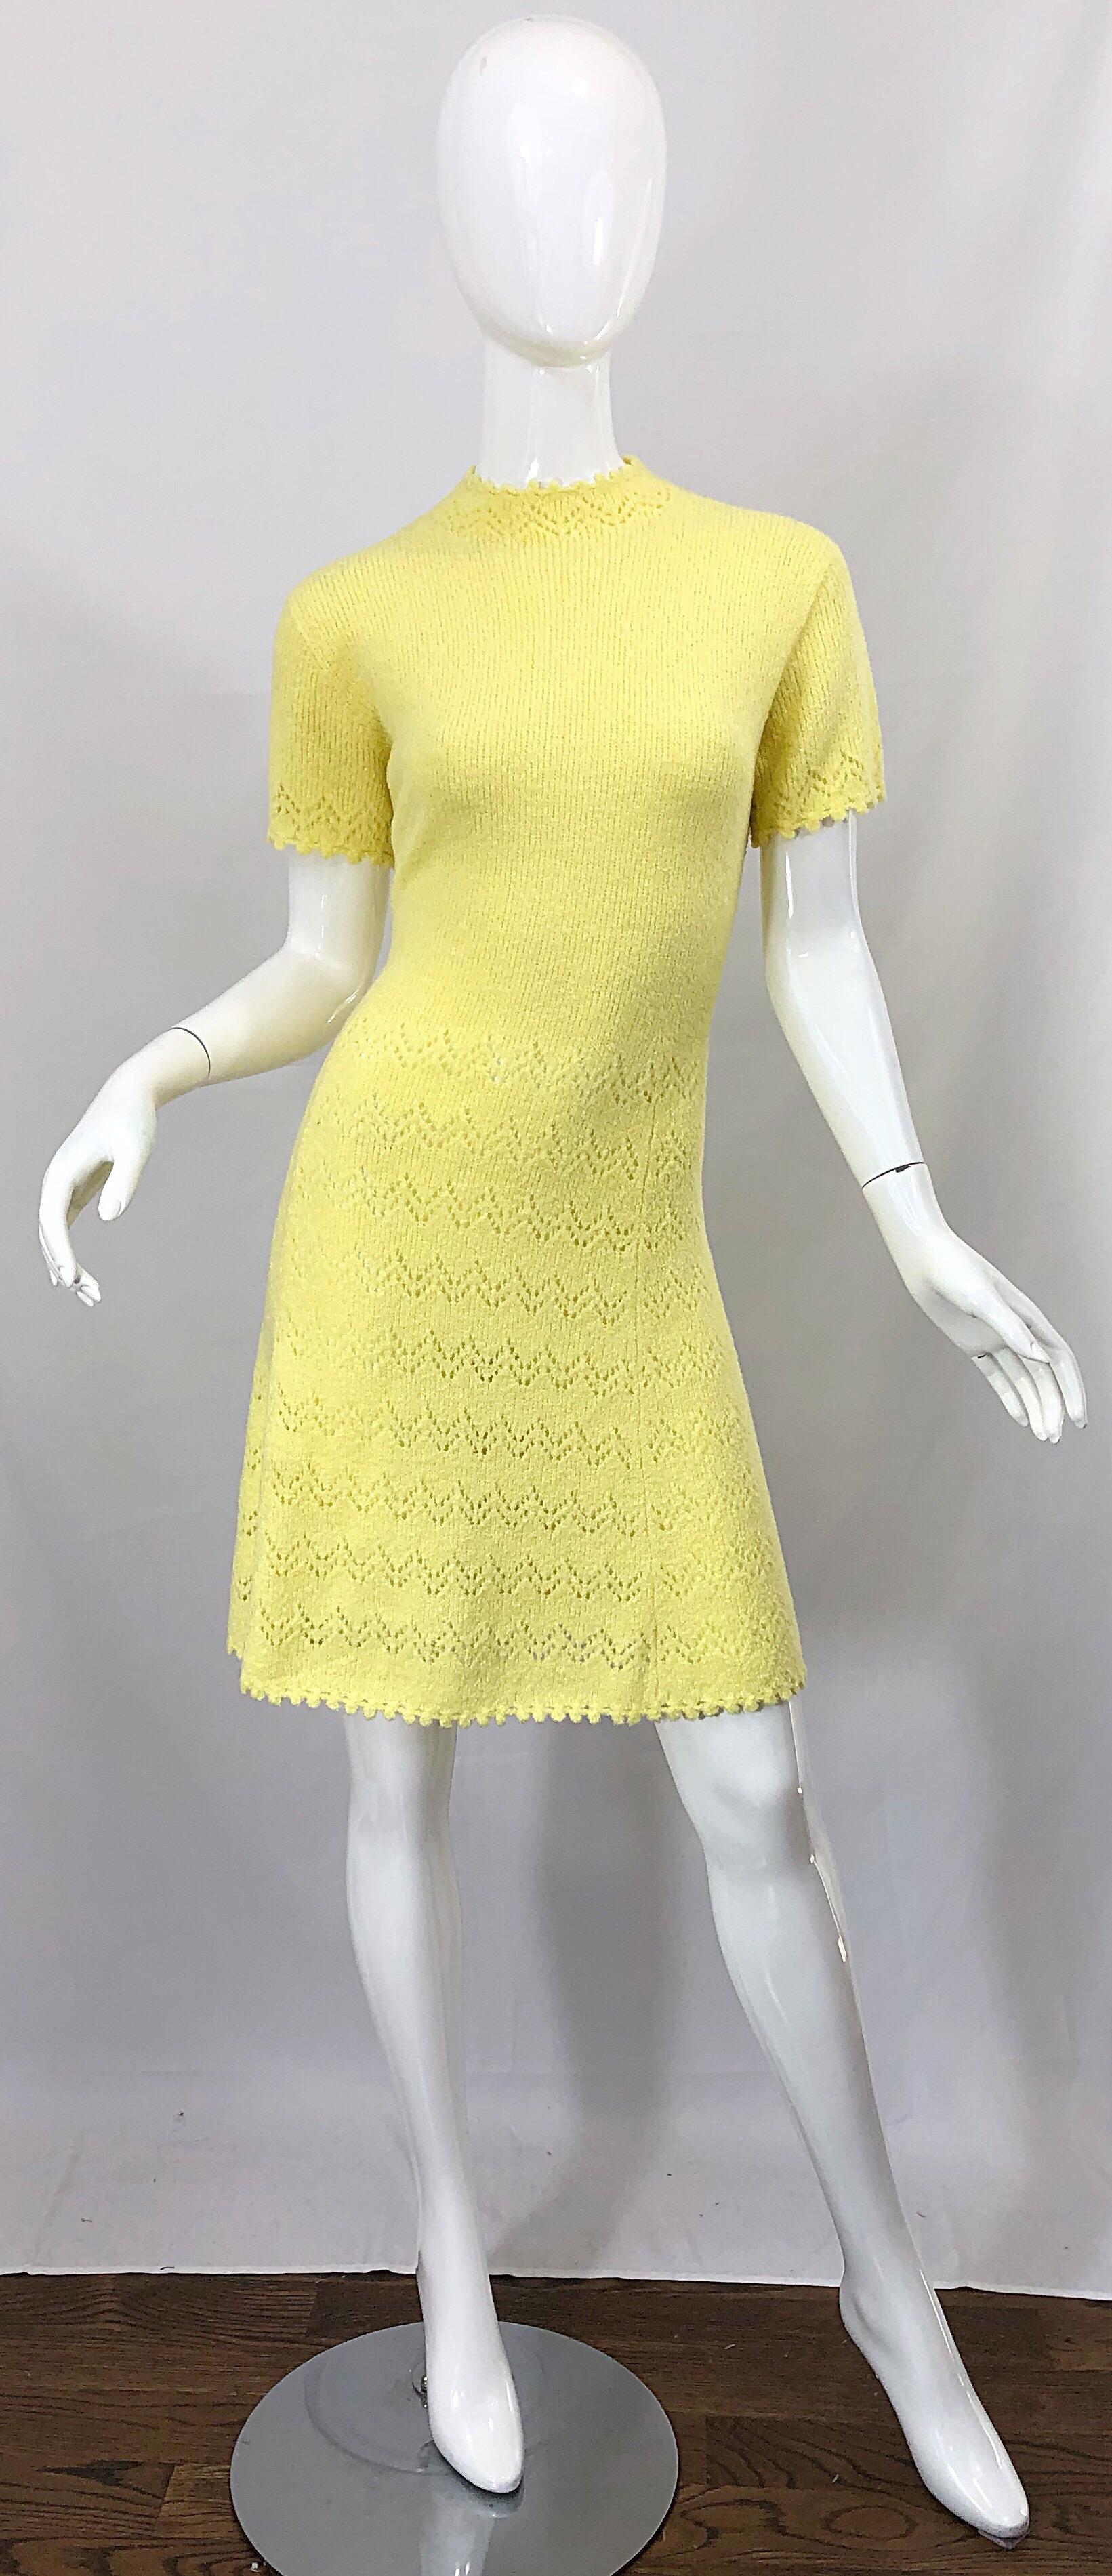 Tres chic ST. JOHN signature santana knit canary yellow short sleeve A-Line dress! Features the softest knit that stretches to fit. Hand crochet detail at the neck, sleeves and below the waist. Full metal zipper up the back with hook-and-eye